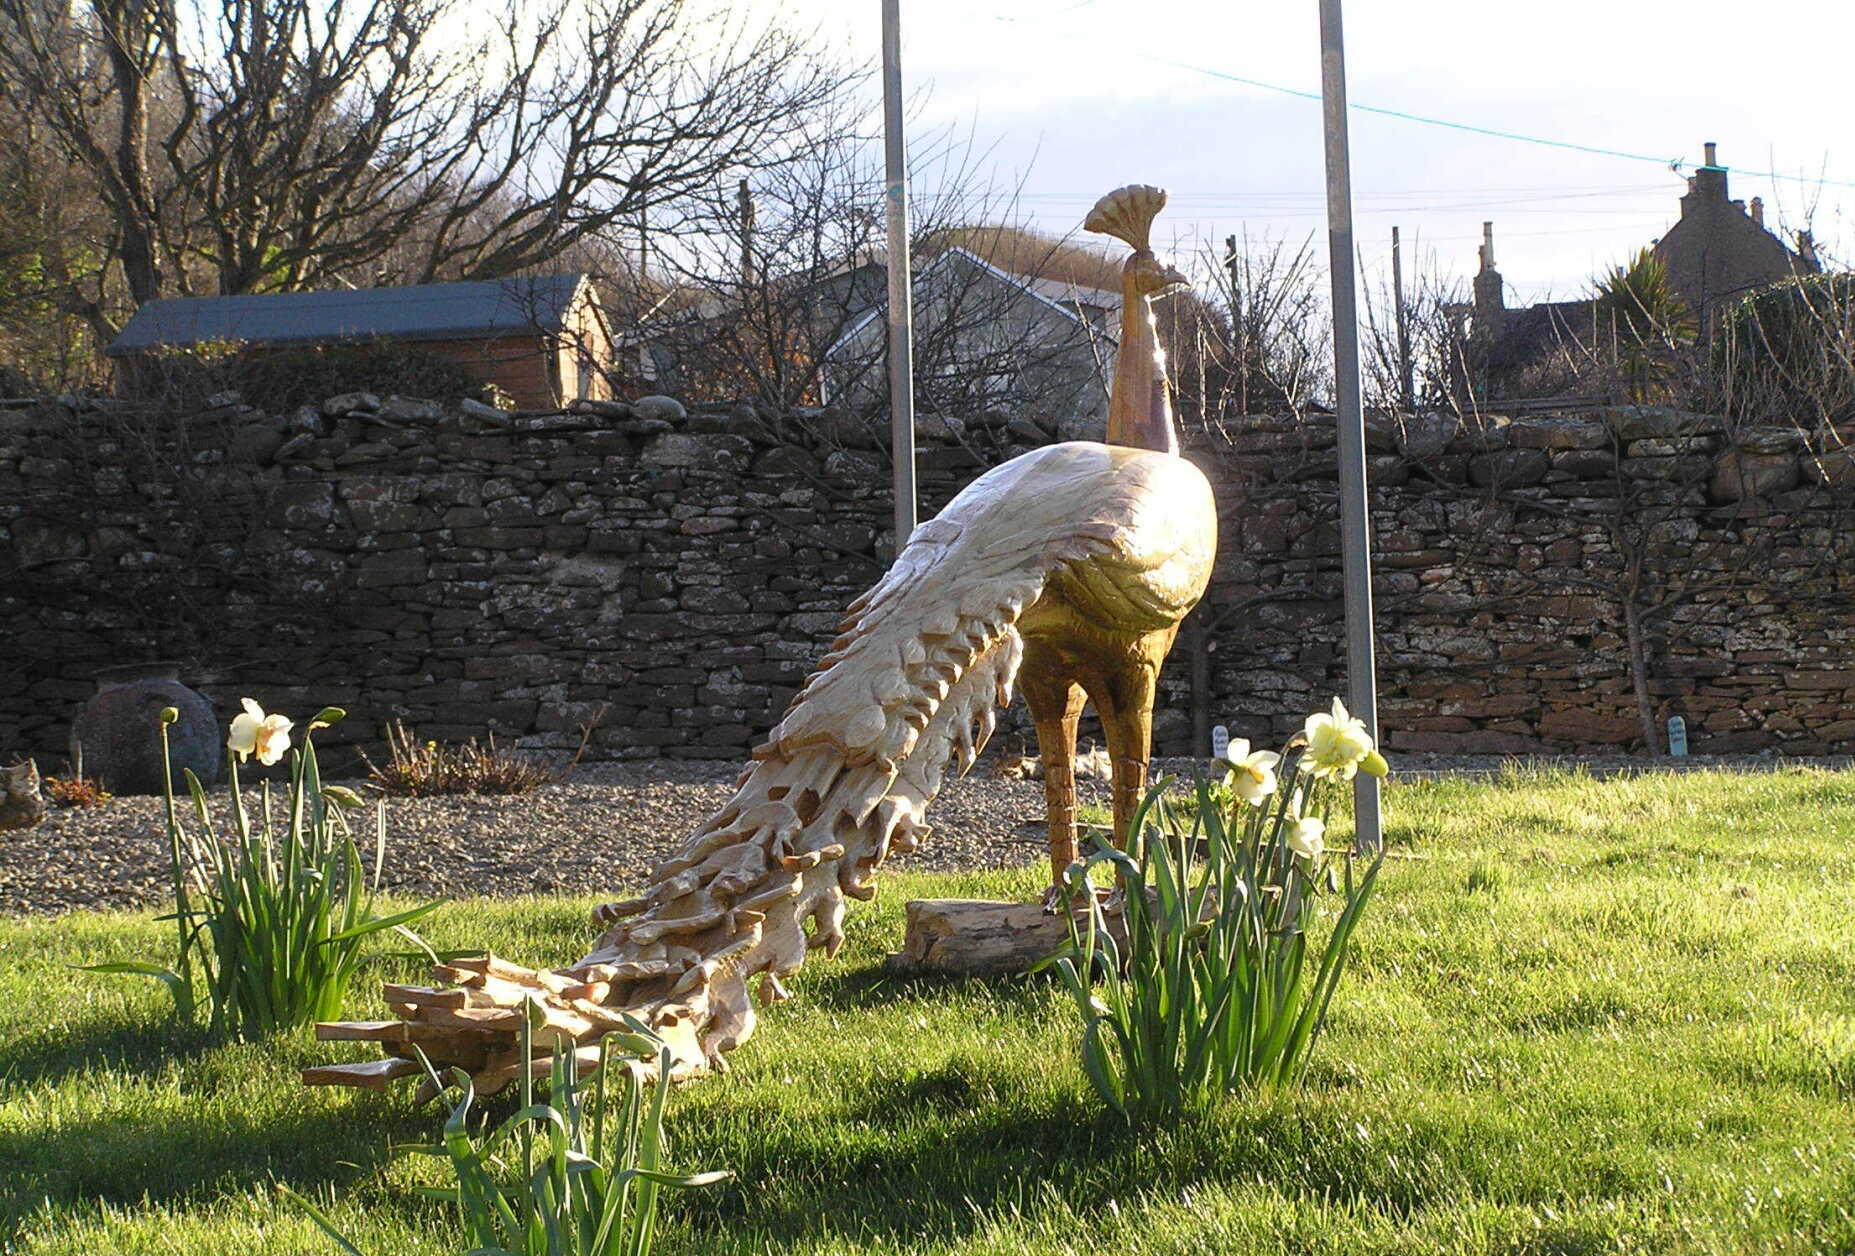 An Indian white peacock garden sculpture made by Ingrained Culture